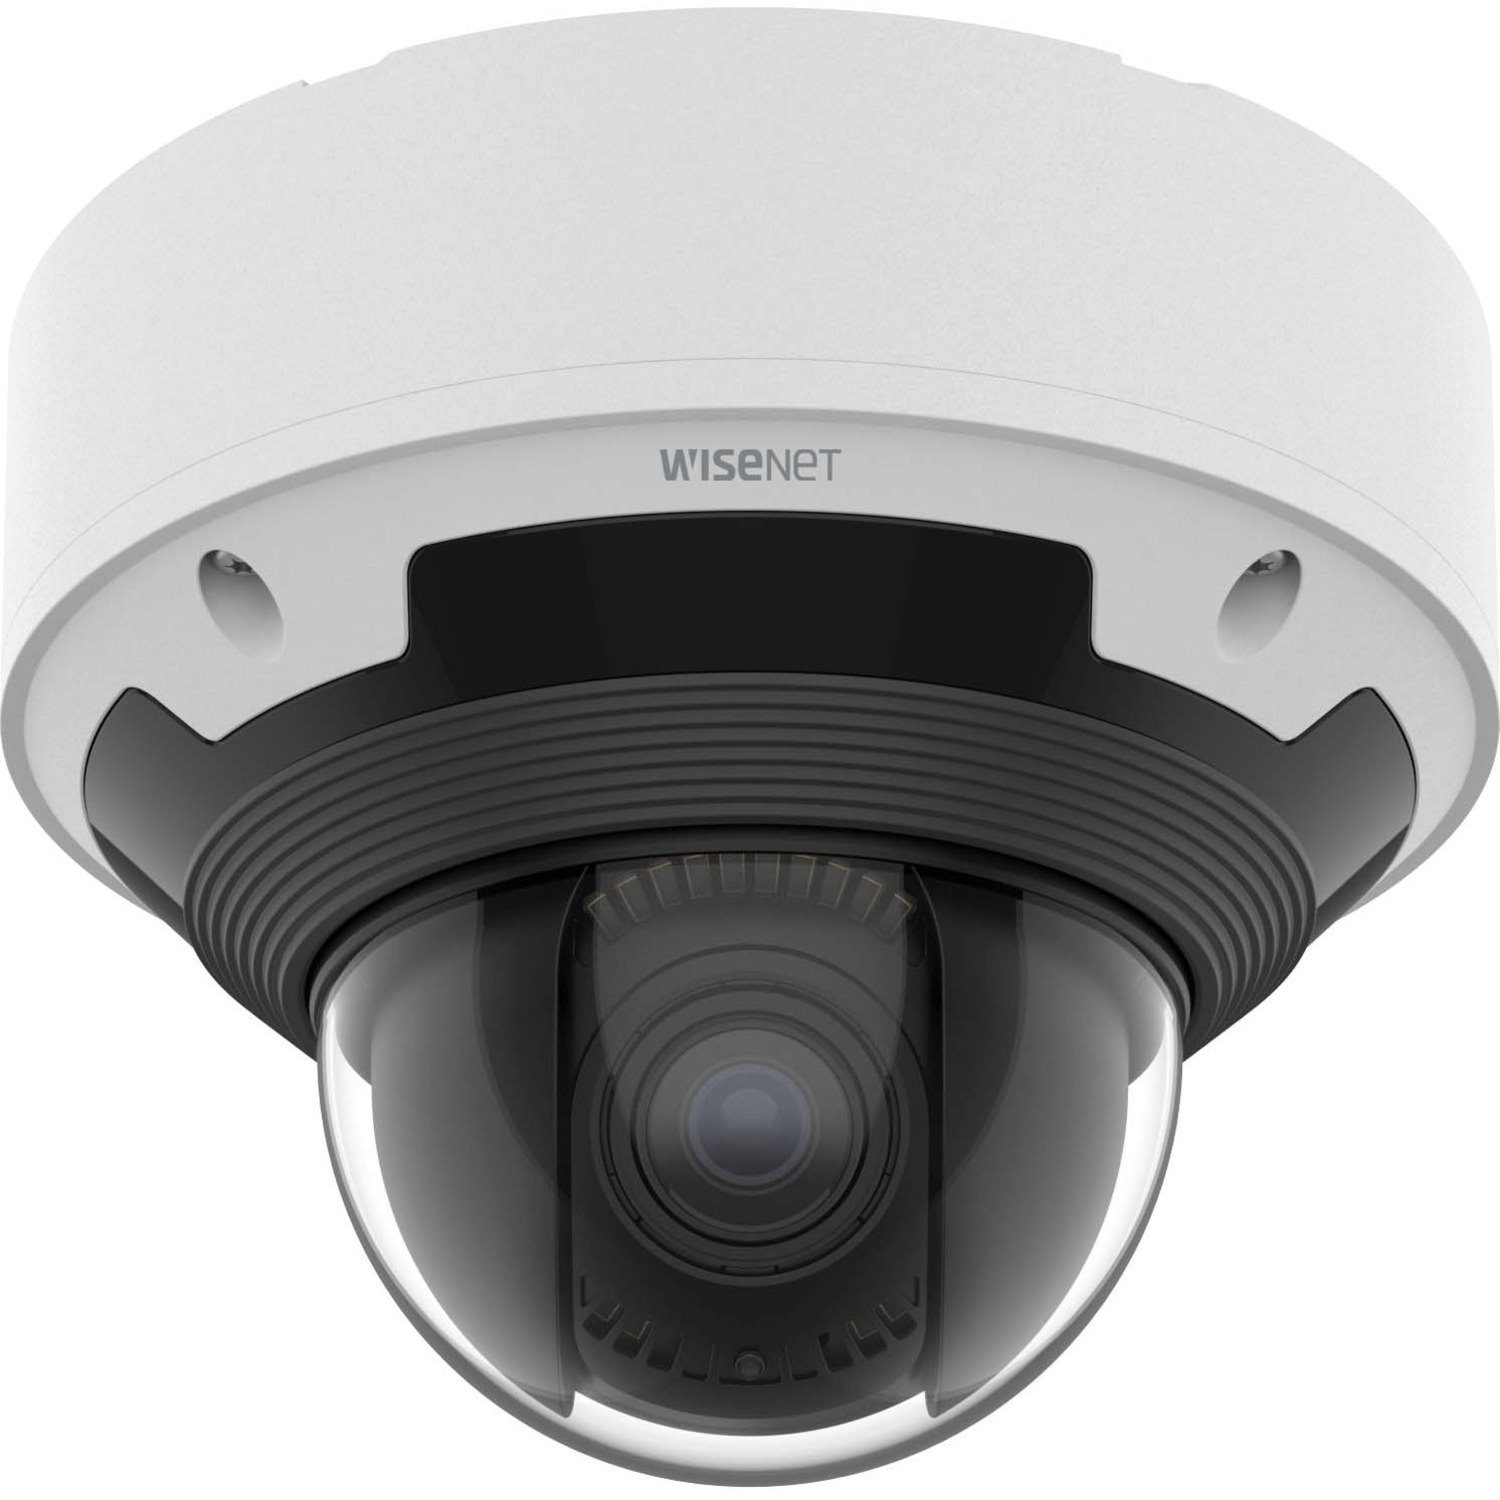 Wisenet XNV-6083RZ 2 Megapixel Outdoor Full HD Network Camera - Color - Dome